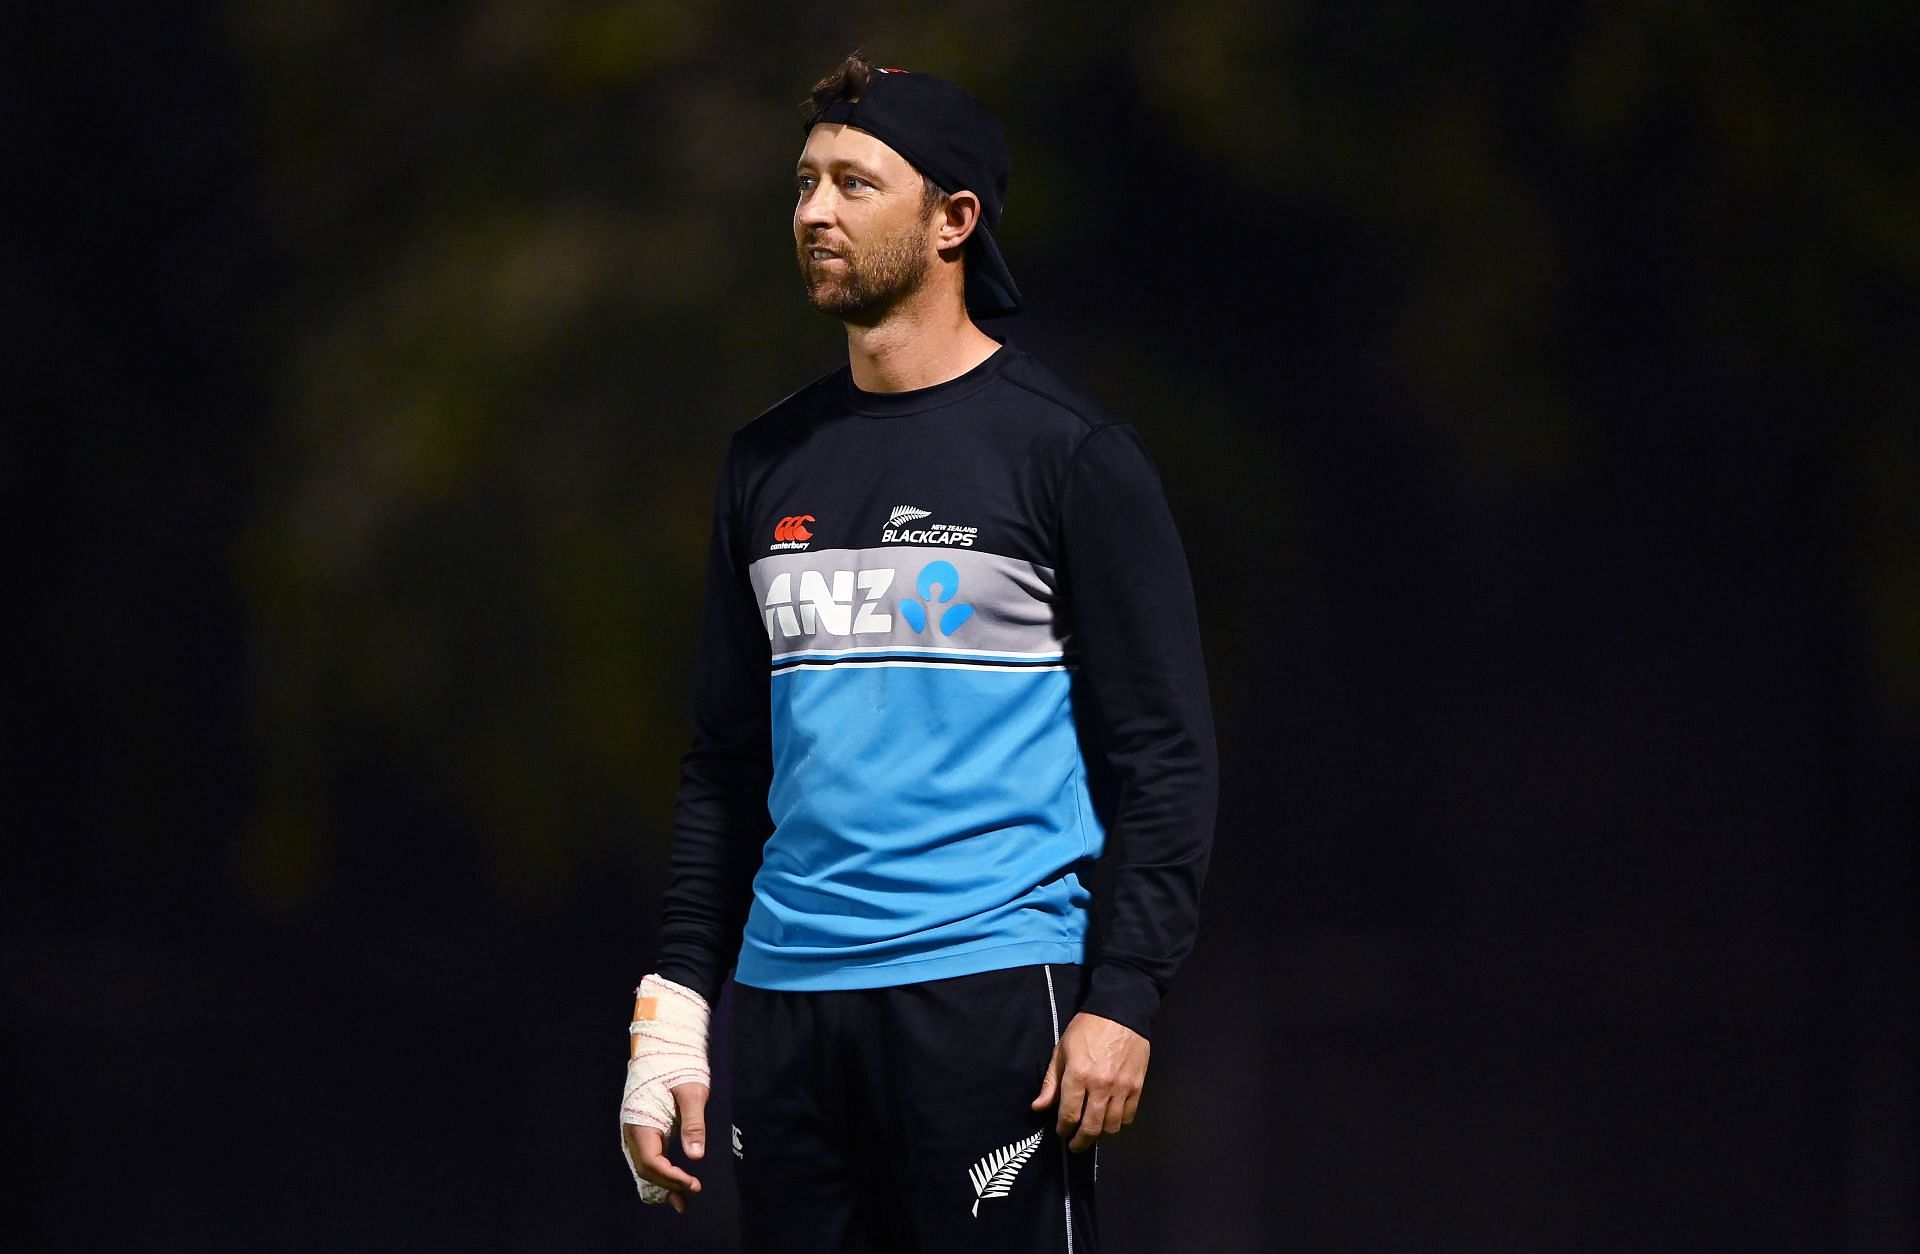 Devon Conway scored 106 runs in the T20I series against the West Indies.